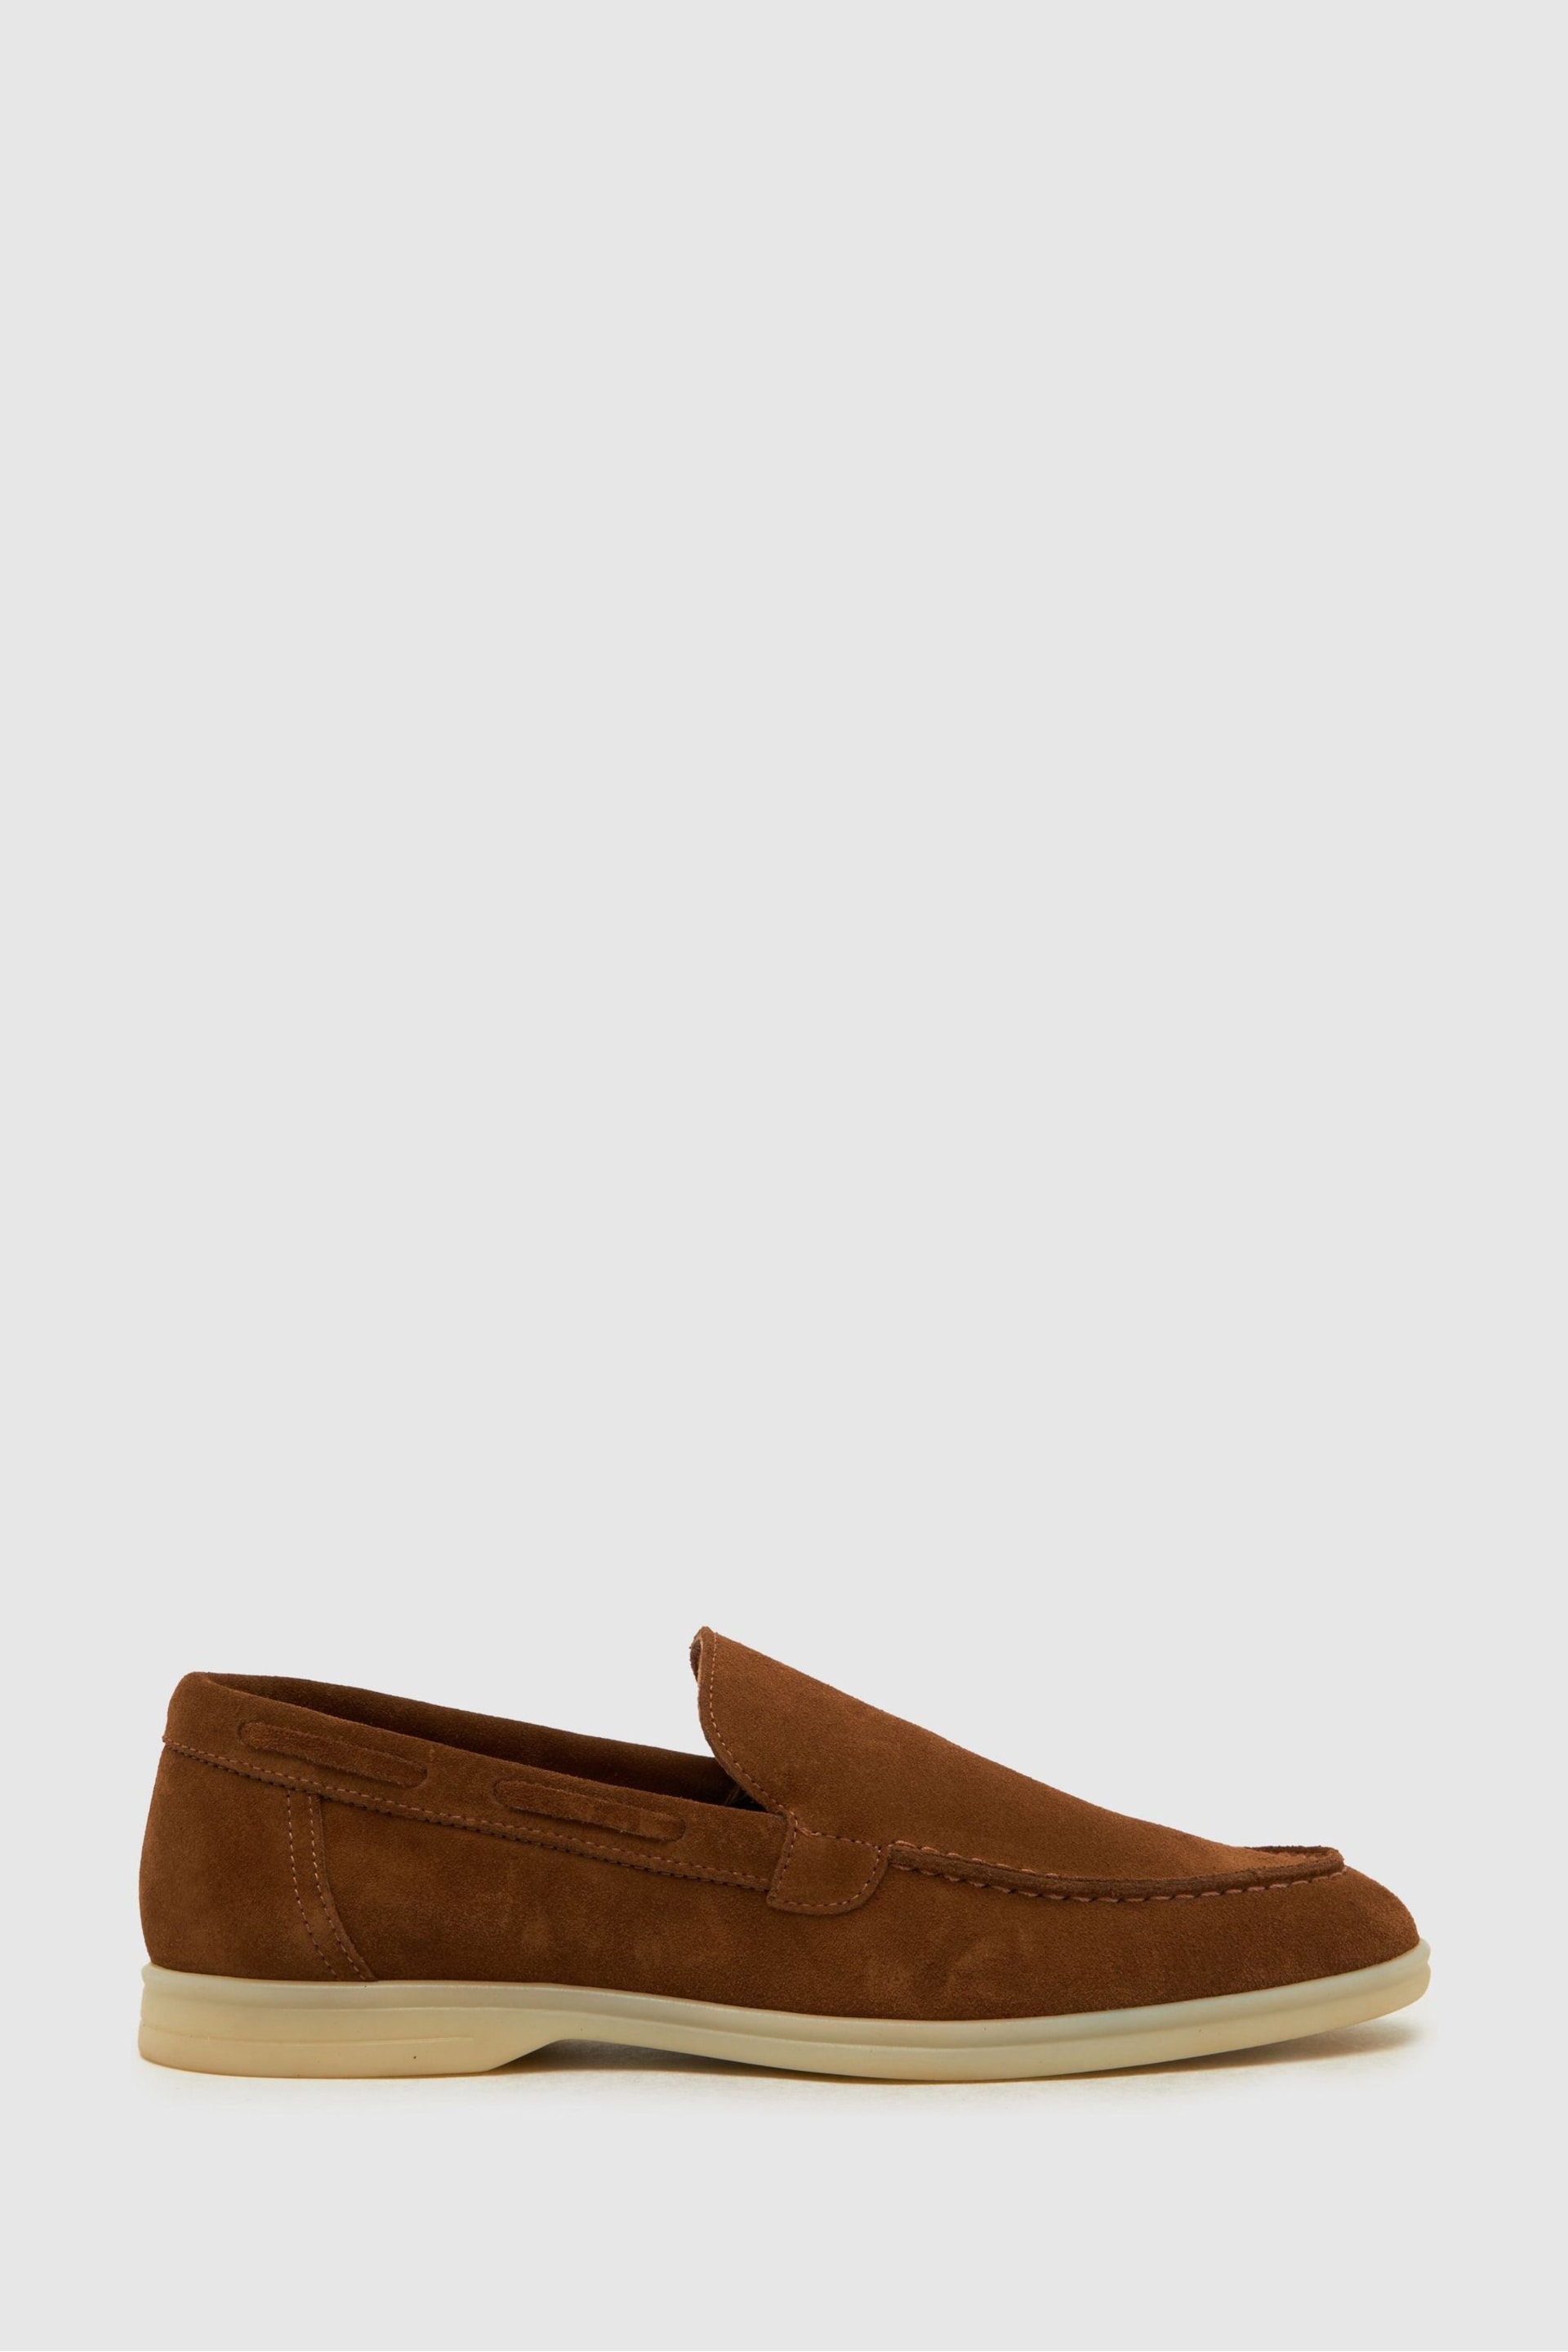 Schuh Phillip Suede Loafers - Image 1 of 4